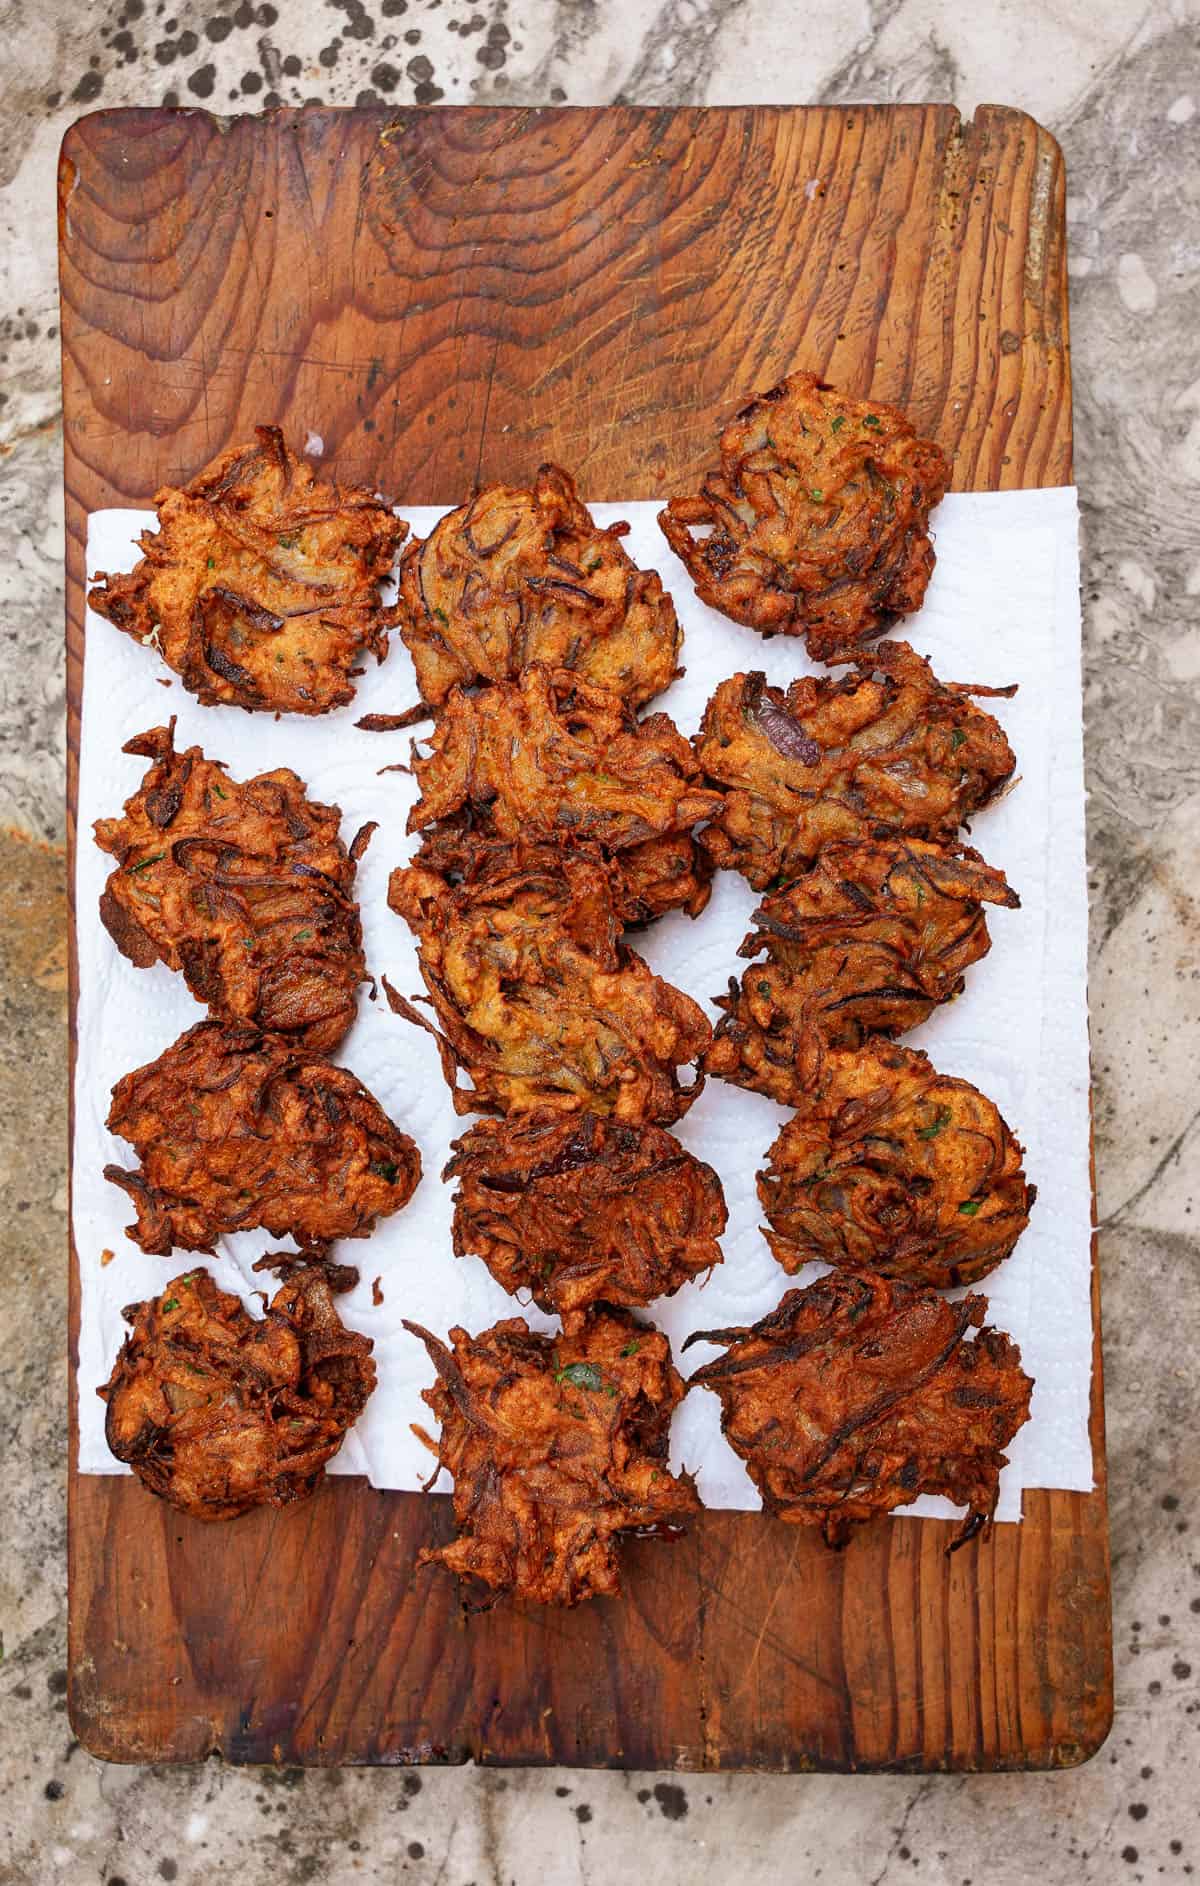 Bhaji cool on a paper-lined wooden board. the paper towels wick off excess oil.